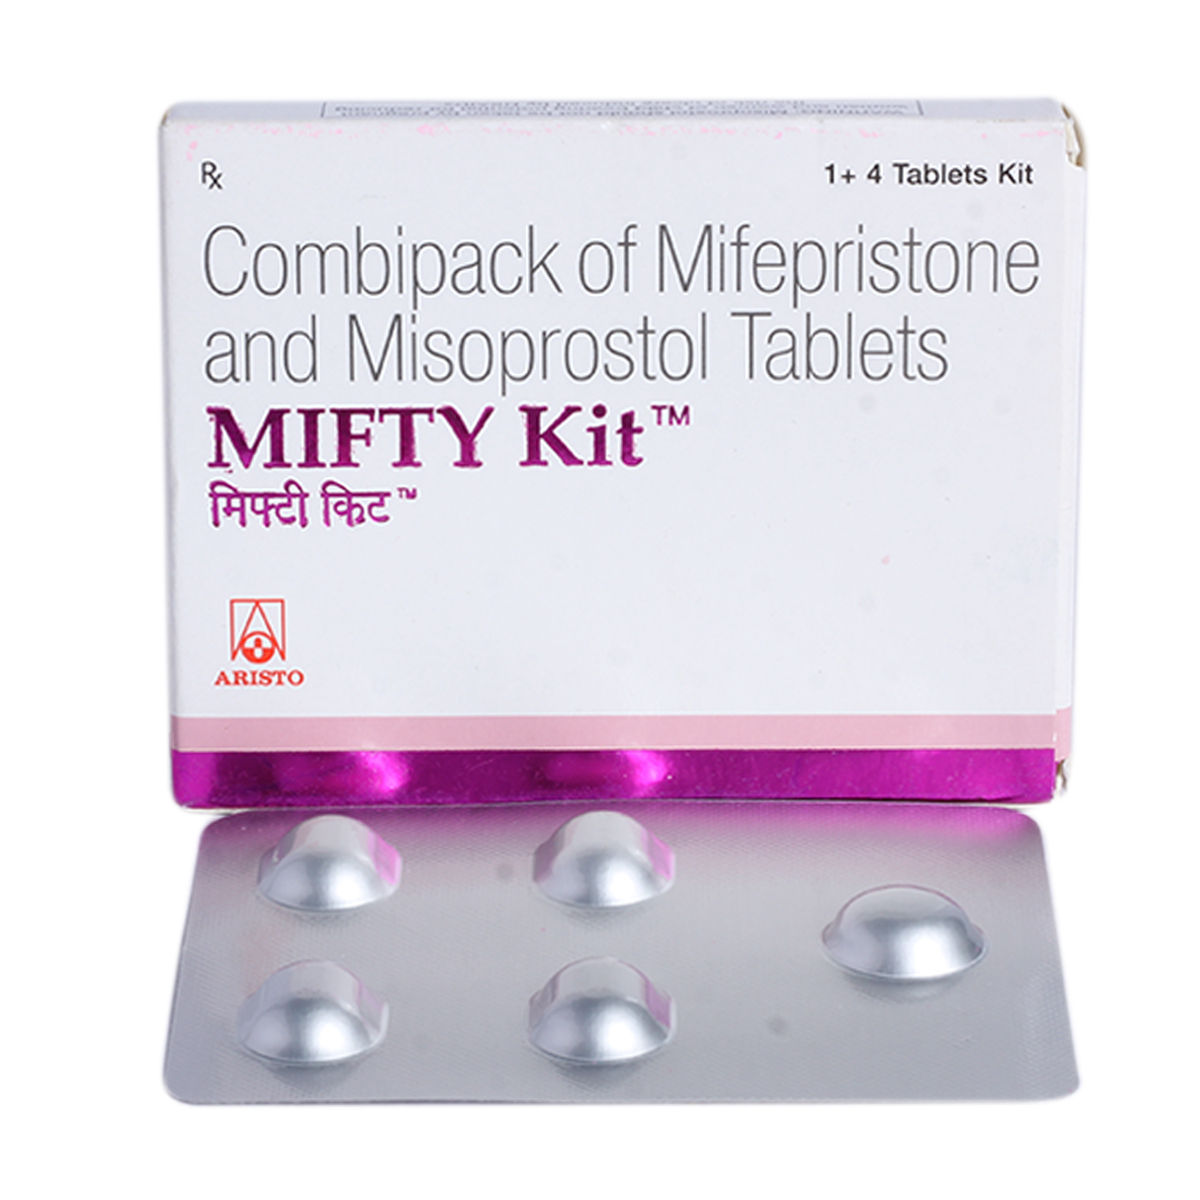 Mifty Kit, Pack of 1 TABLET